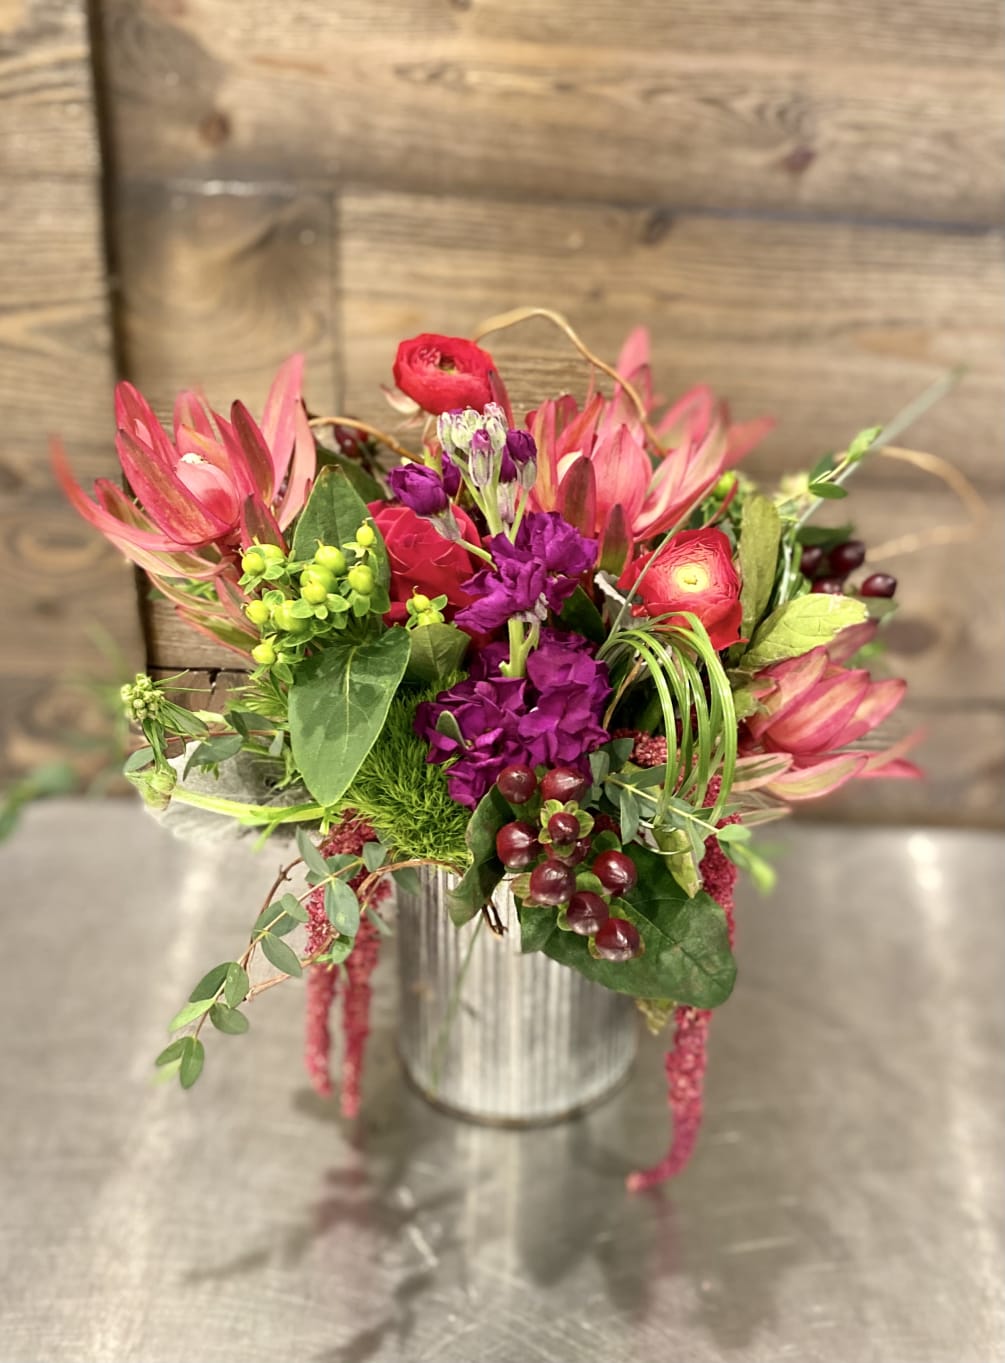 Eclectic mix of jewel toned flowers including leucadendron, hypericum, dianthus, amaranthus and